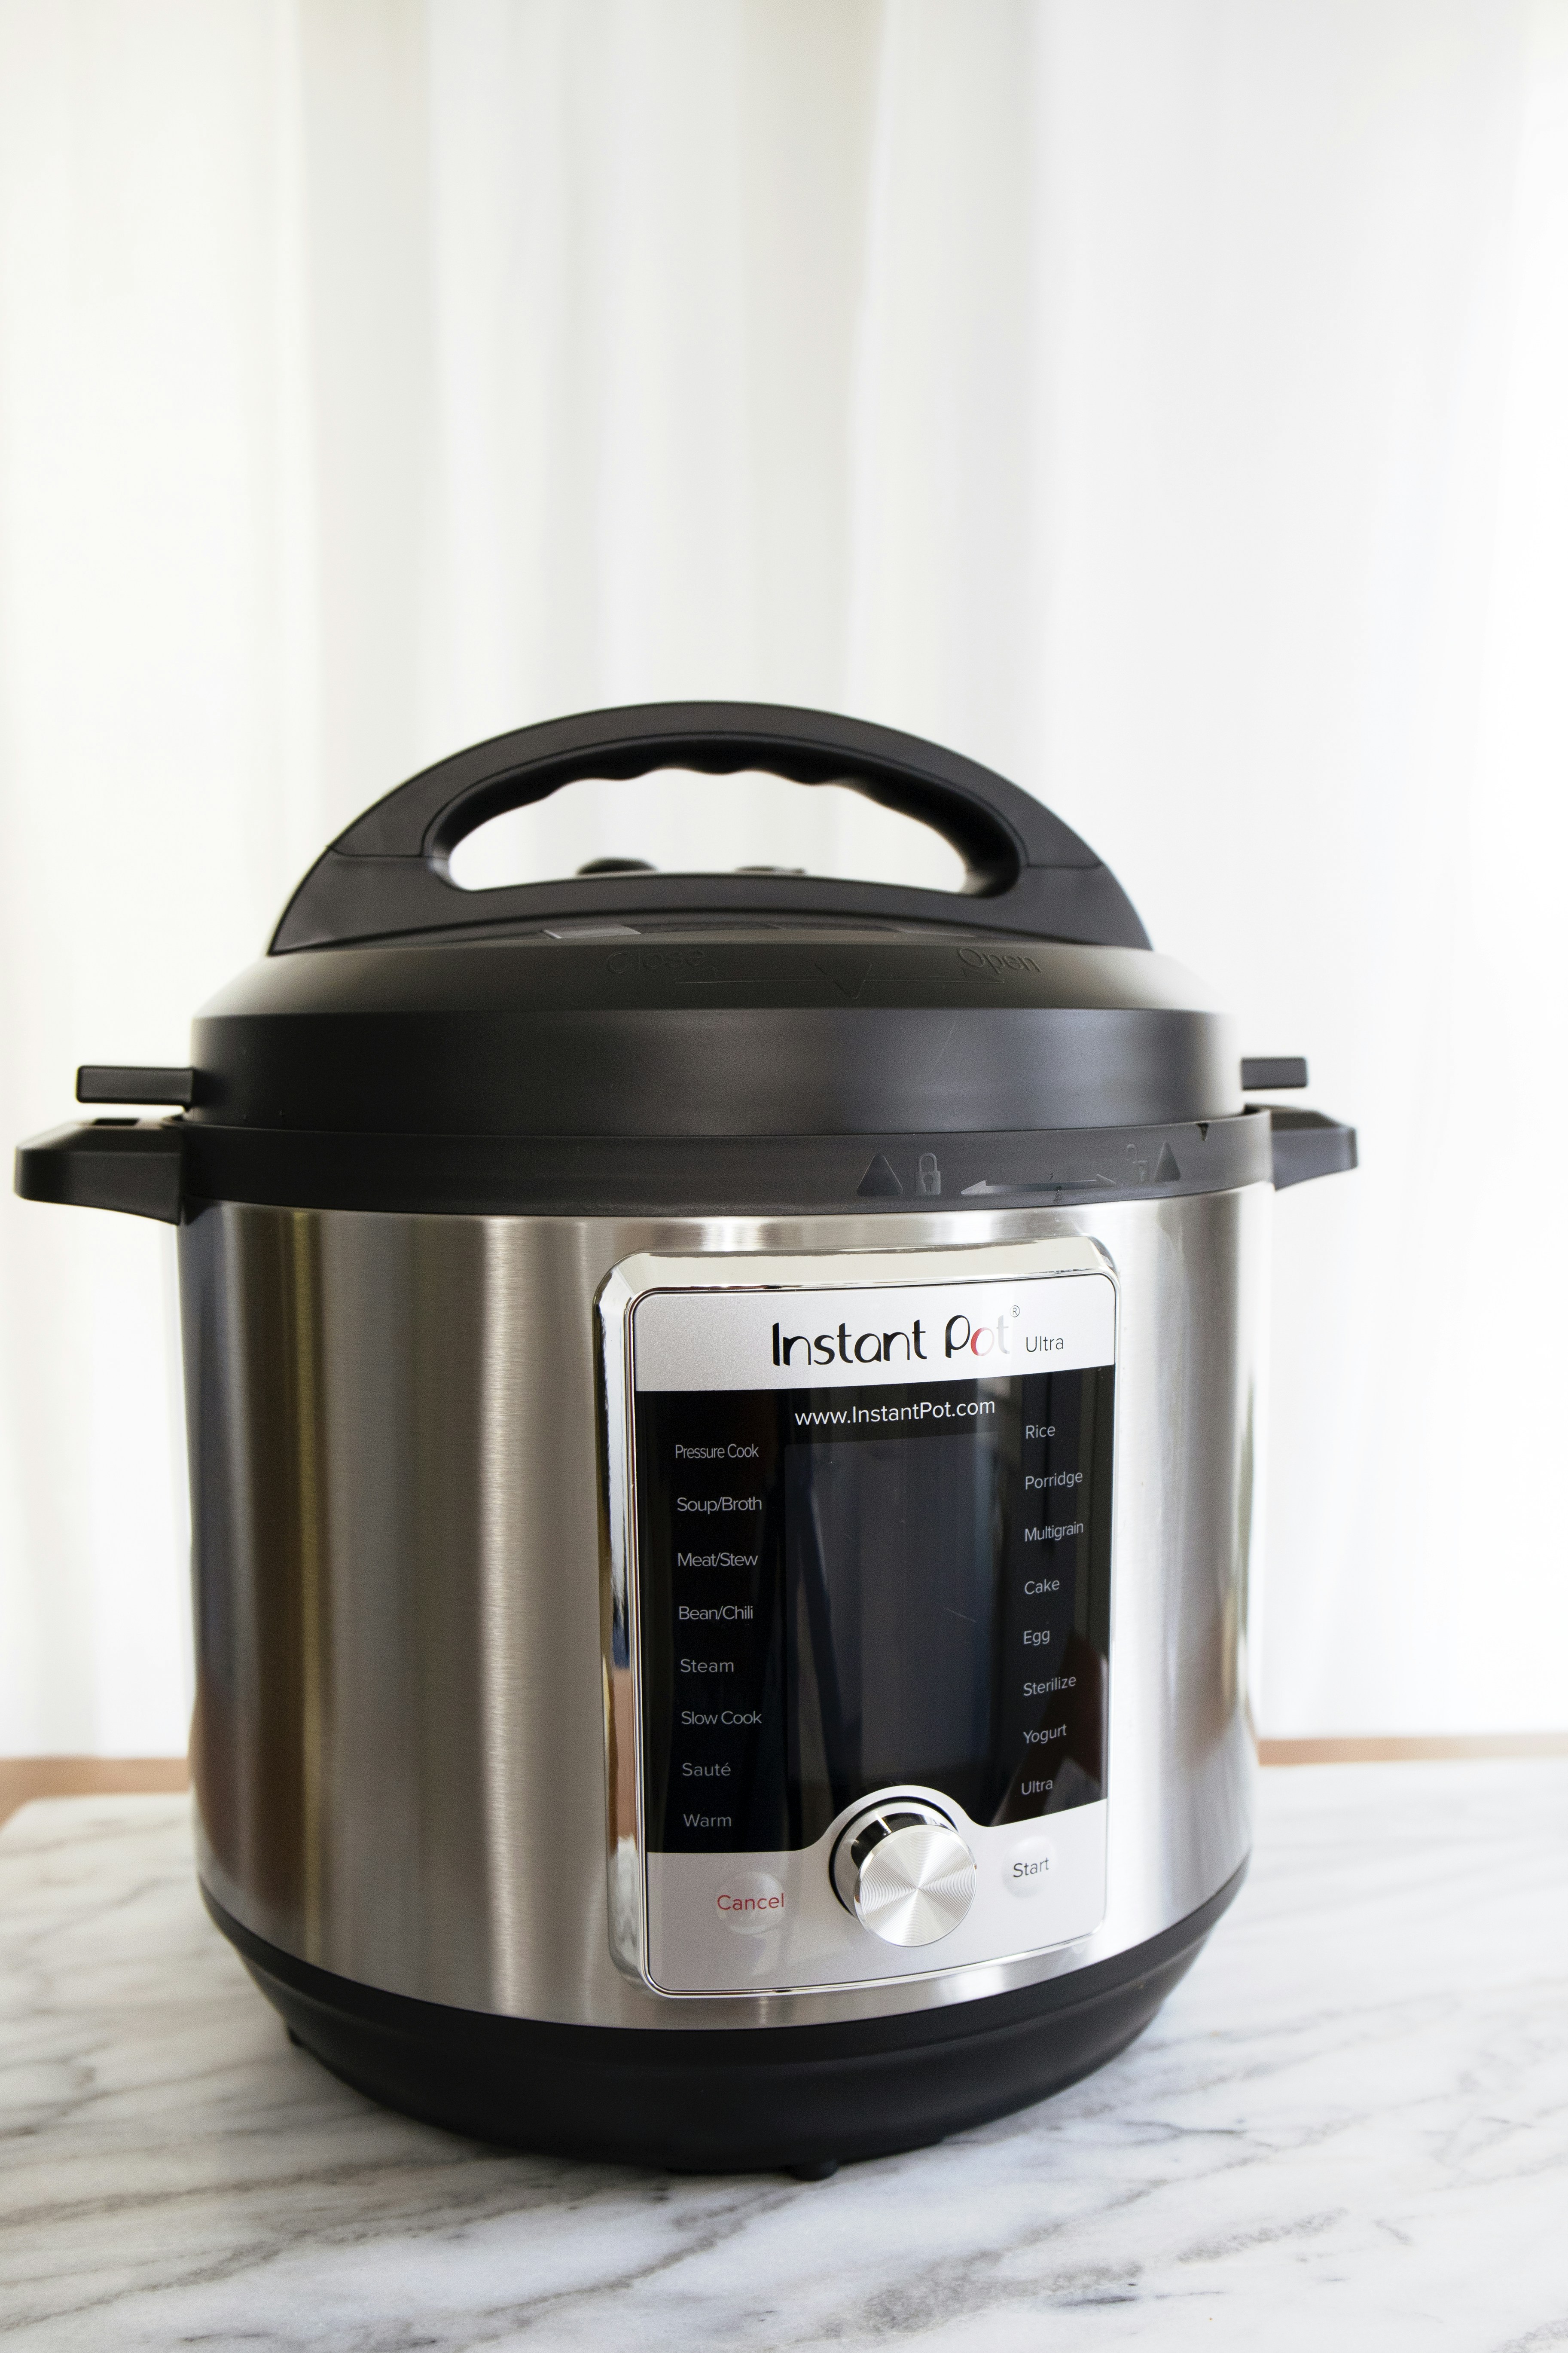 Instant Pot Mexican Rice - Easy Pressure Cooker Recipe - Upstate Ramblings